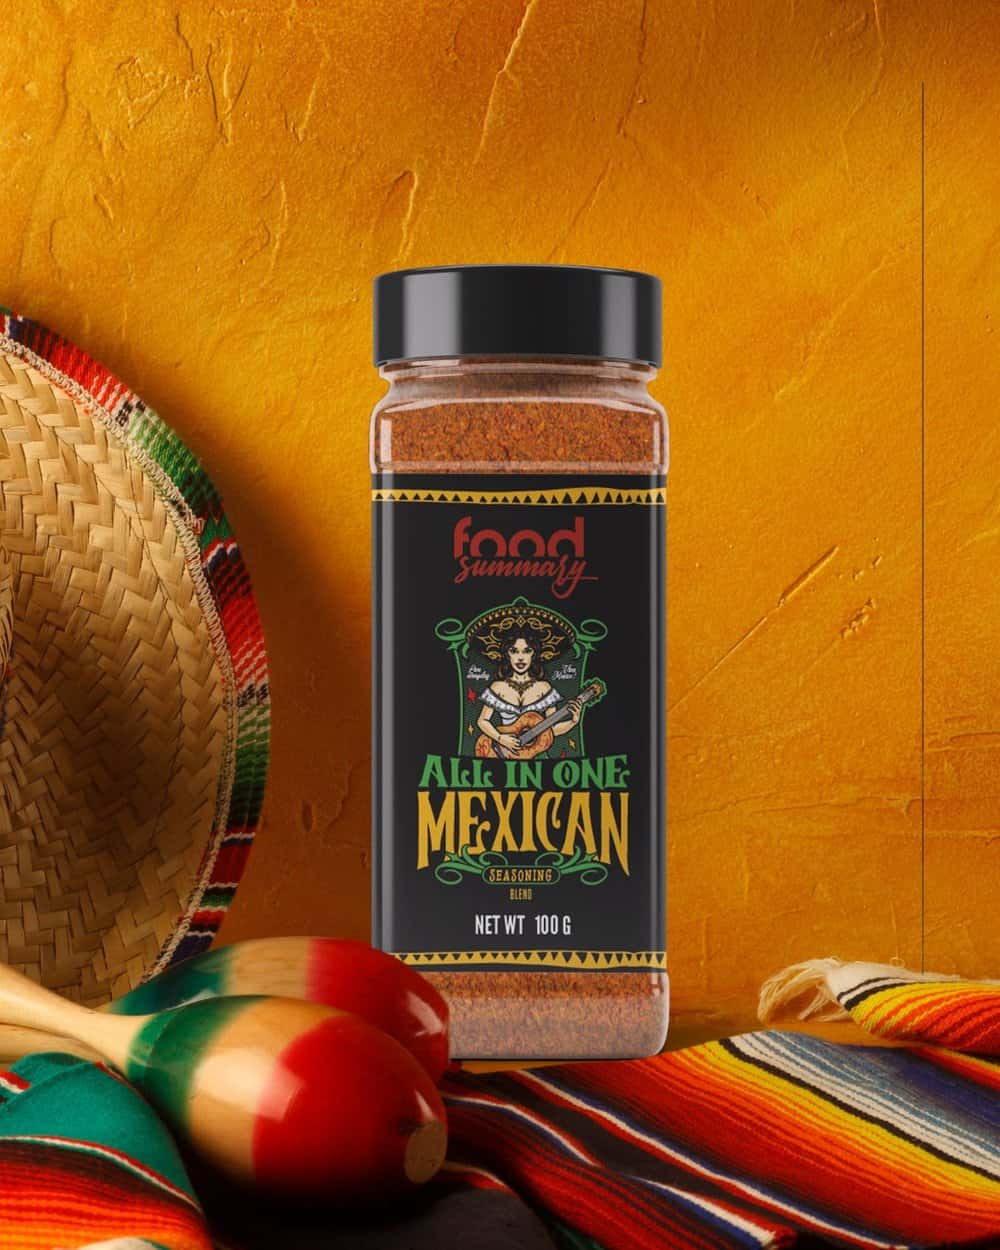 All in One Mexican Seasoning (100g)